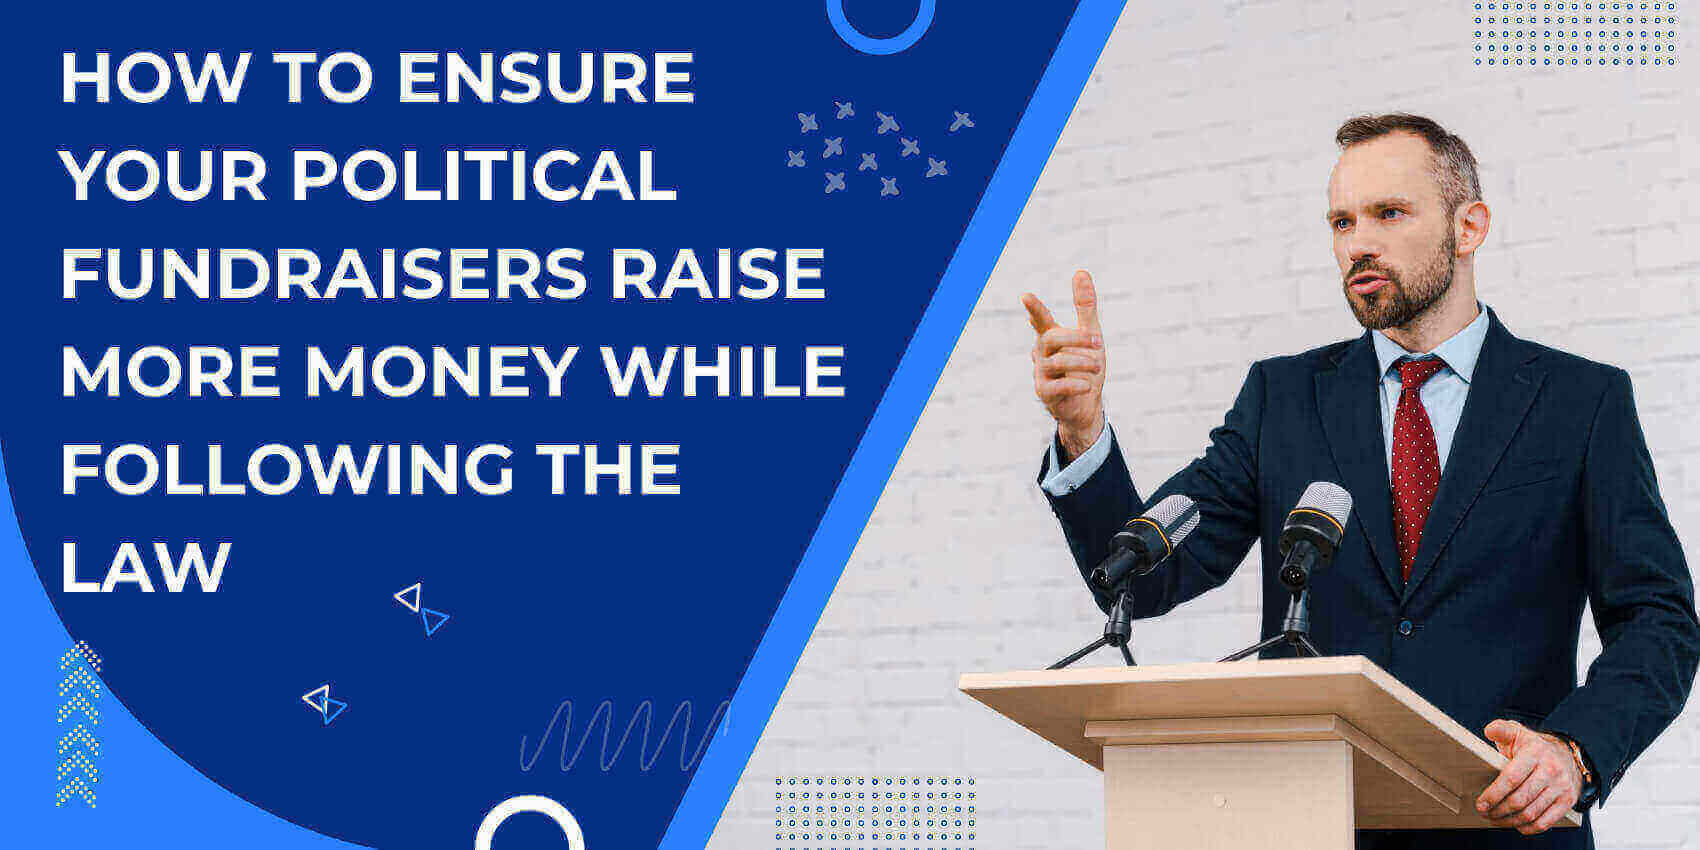 How to Ensure Your Political Fundraisers Raise More Money While Following the Law